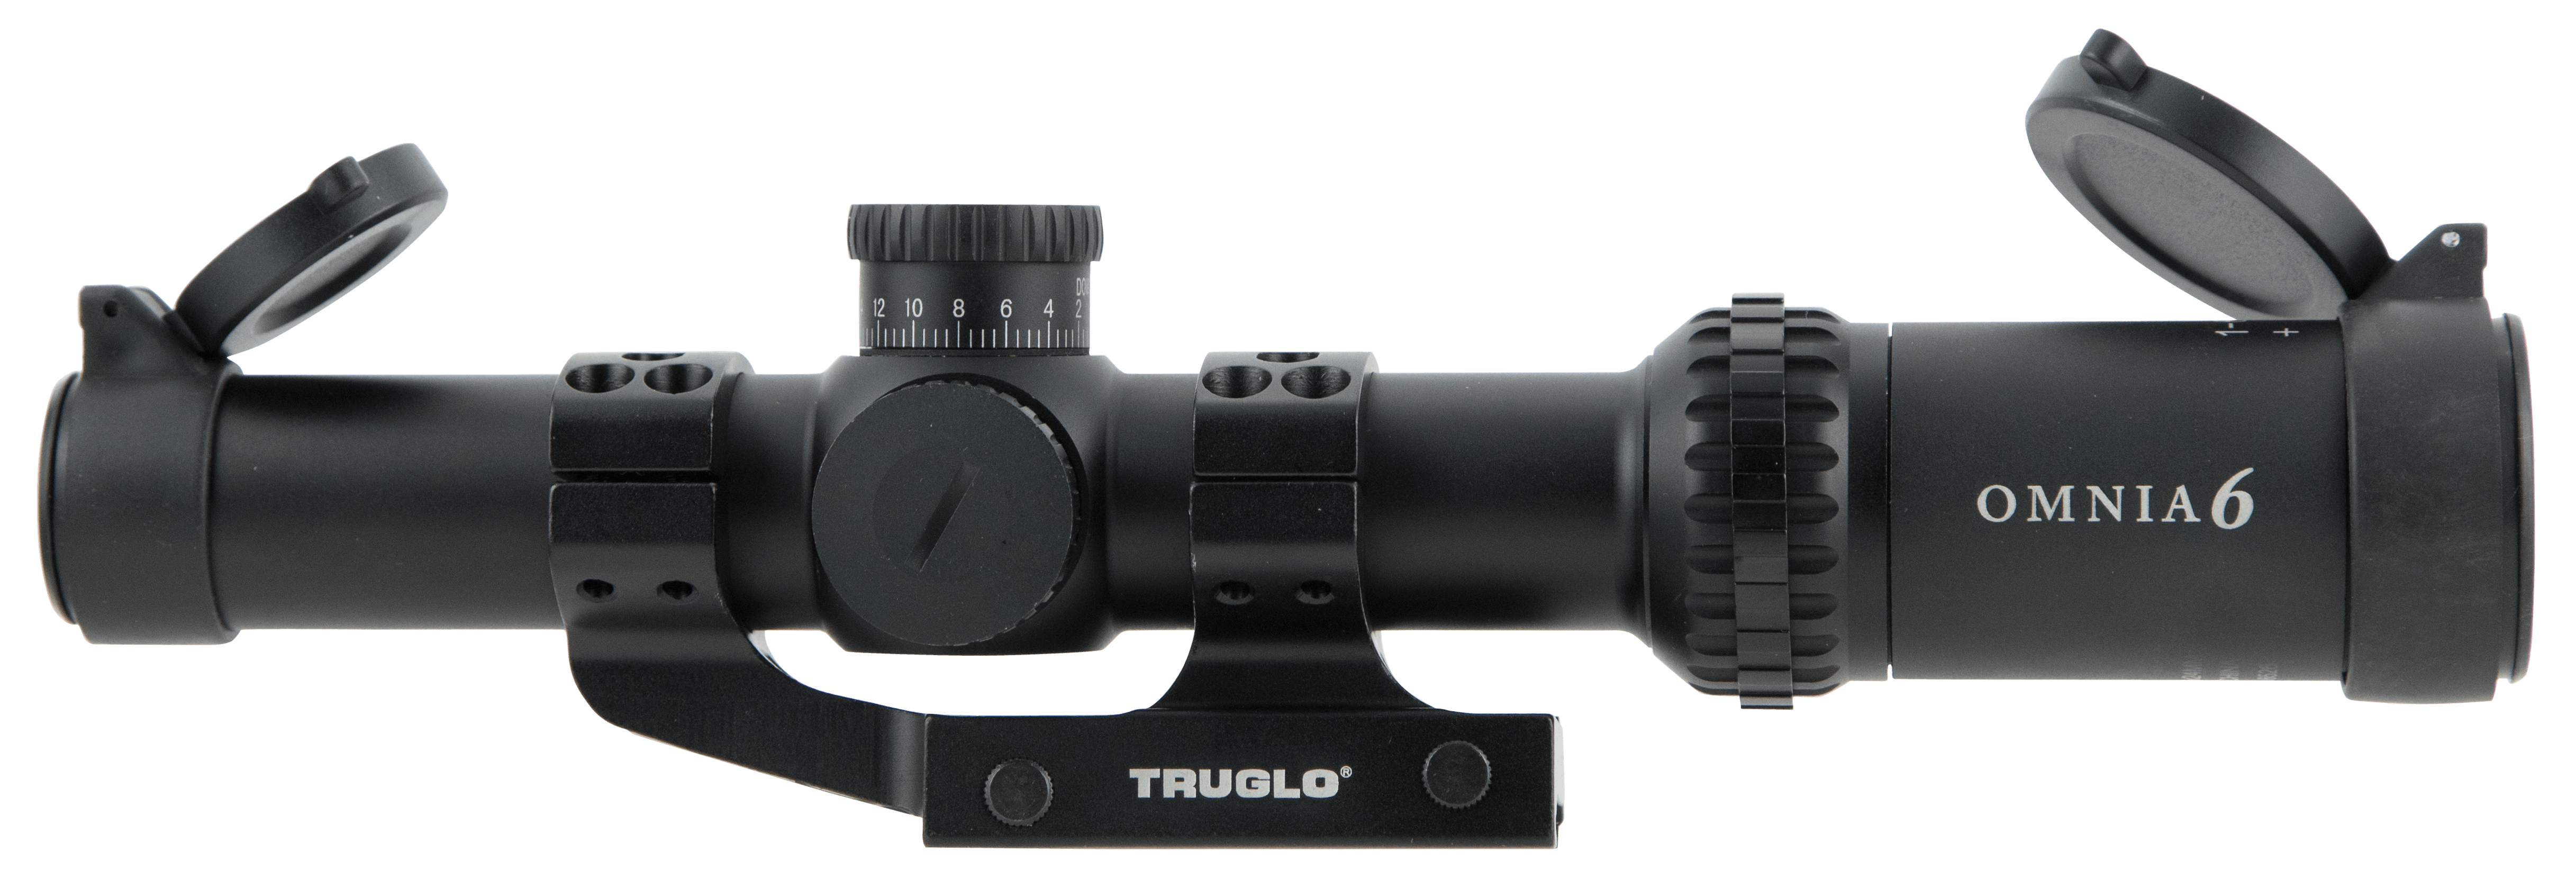 Truglo Omnia Series - Magnification: 1-6x-img-1